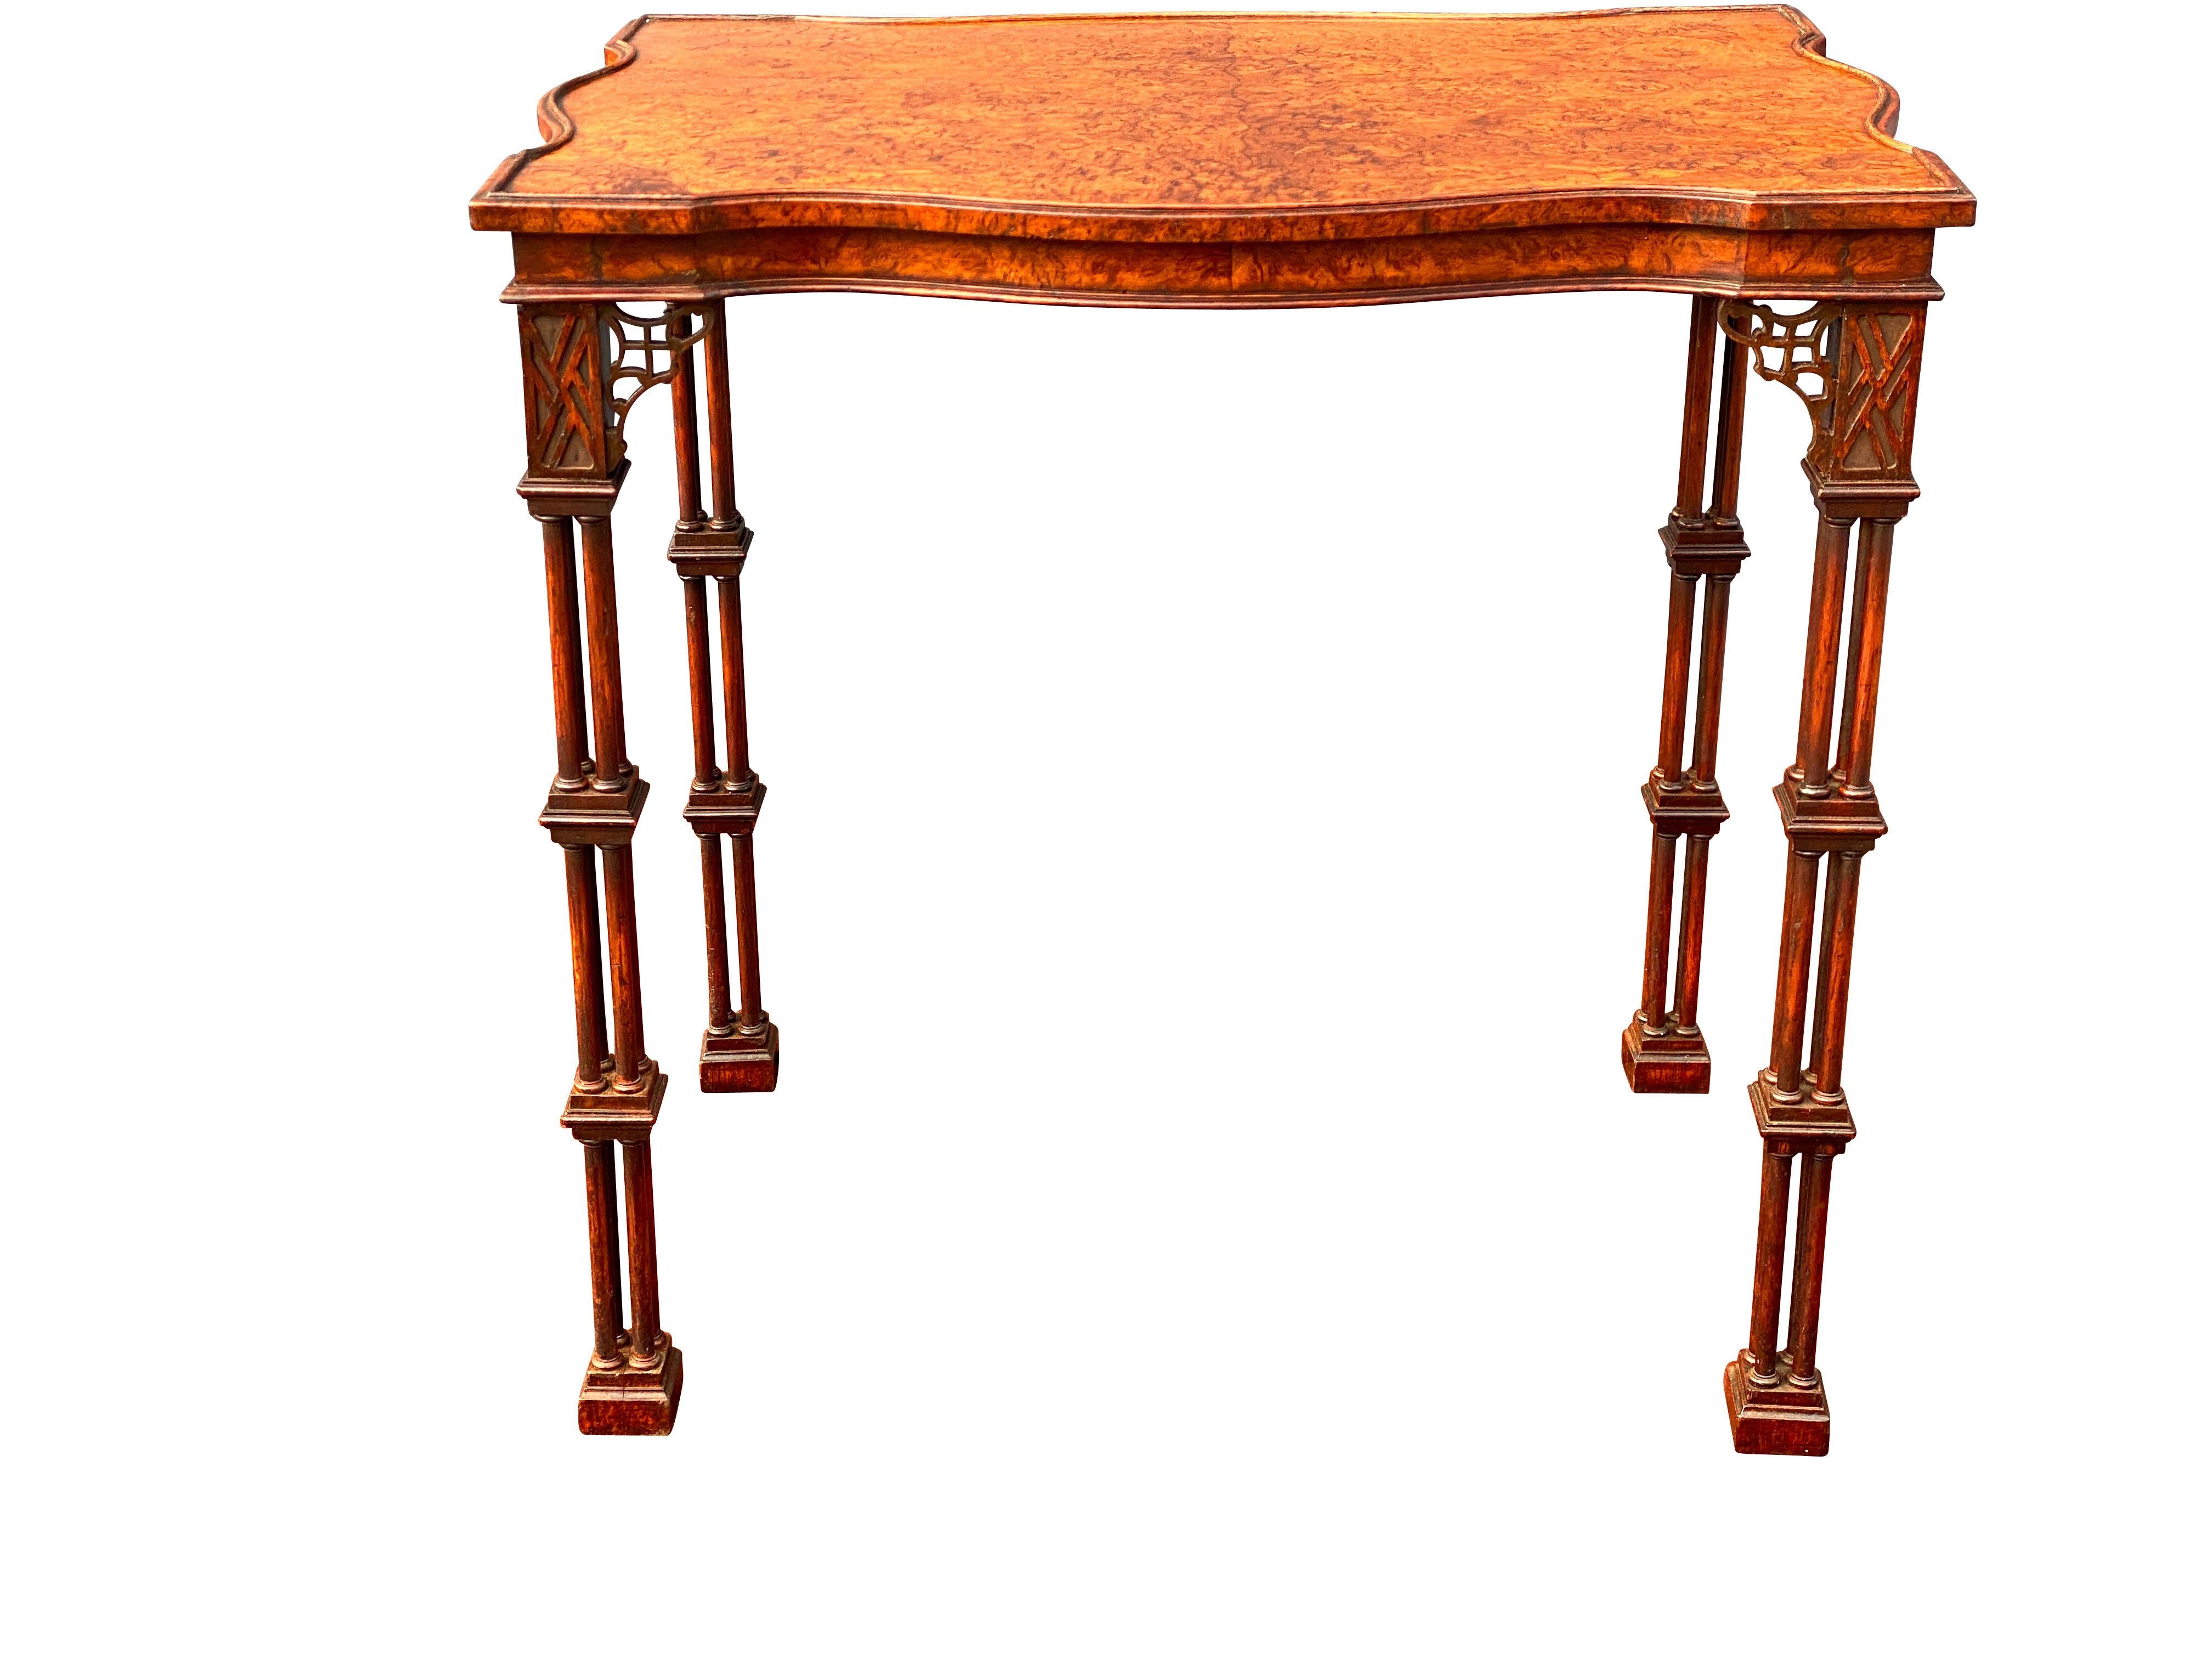 English George III Style Burl Walnut and Mahogany China Table Attributed to Gillow For Sale